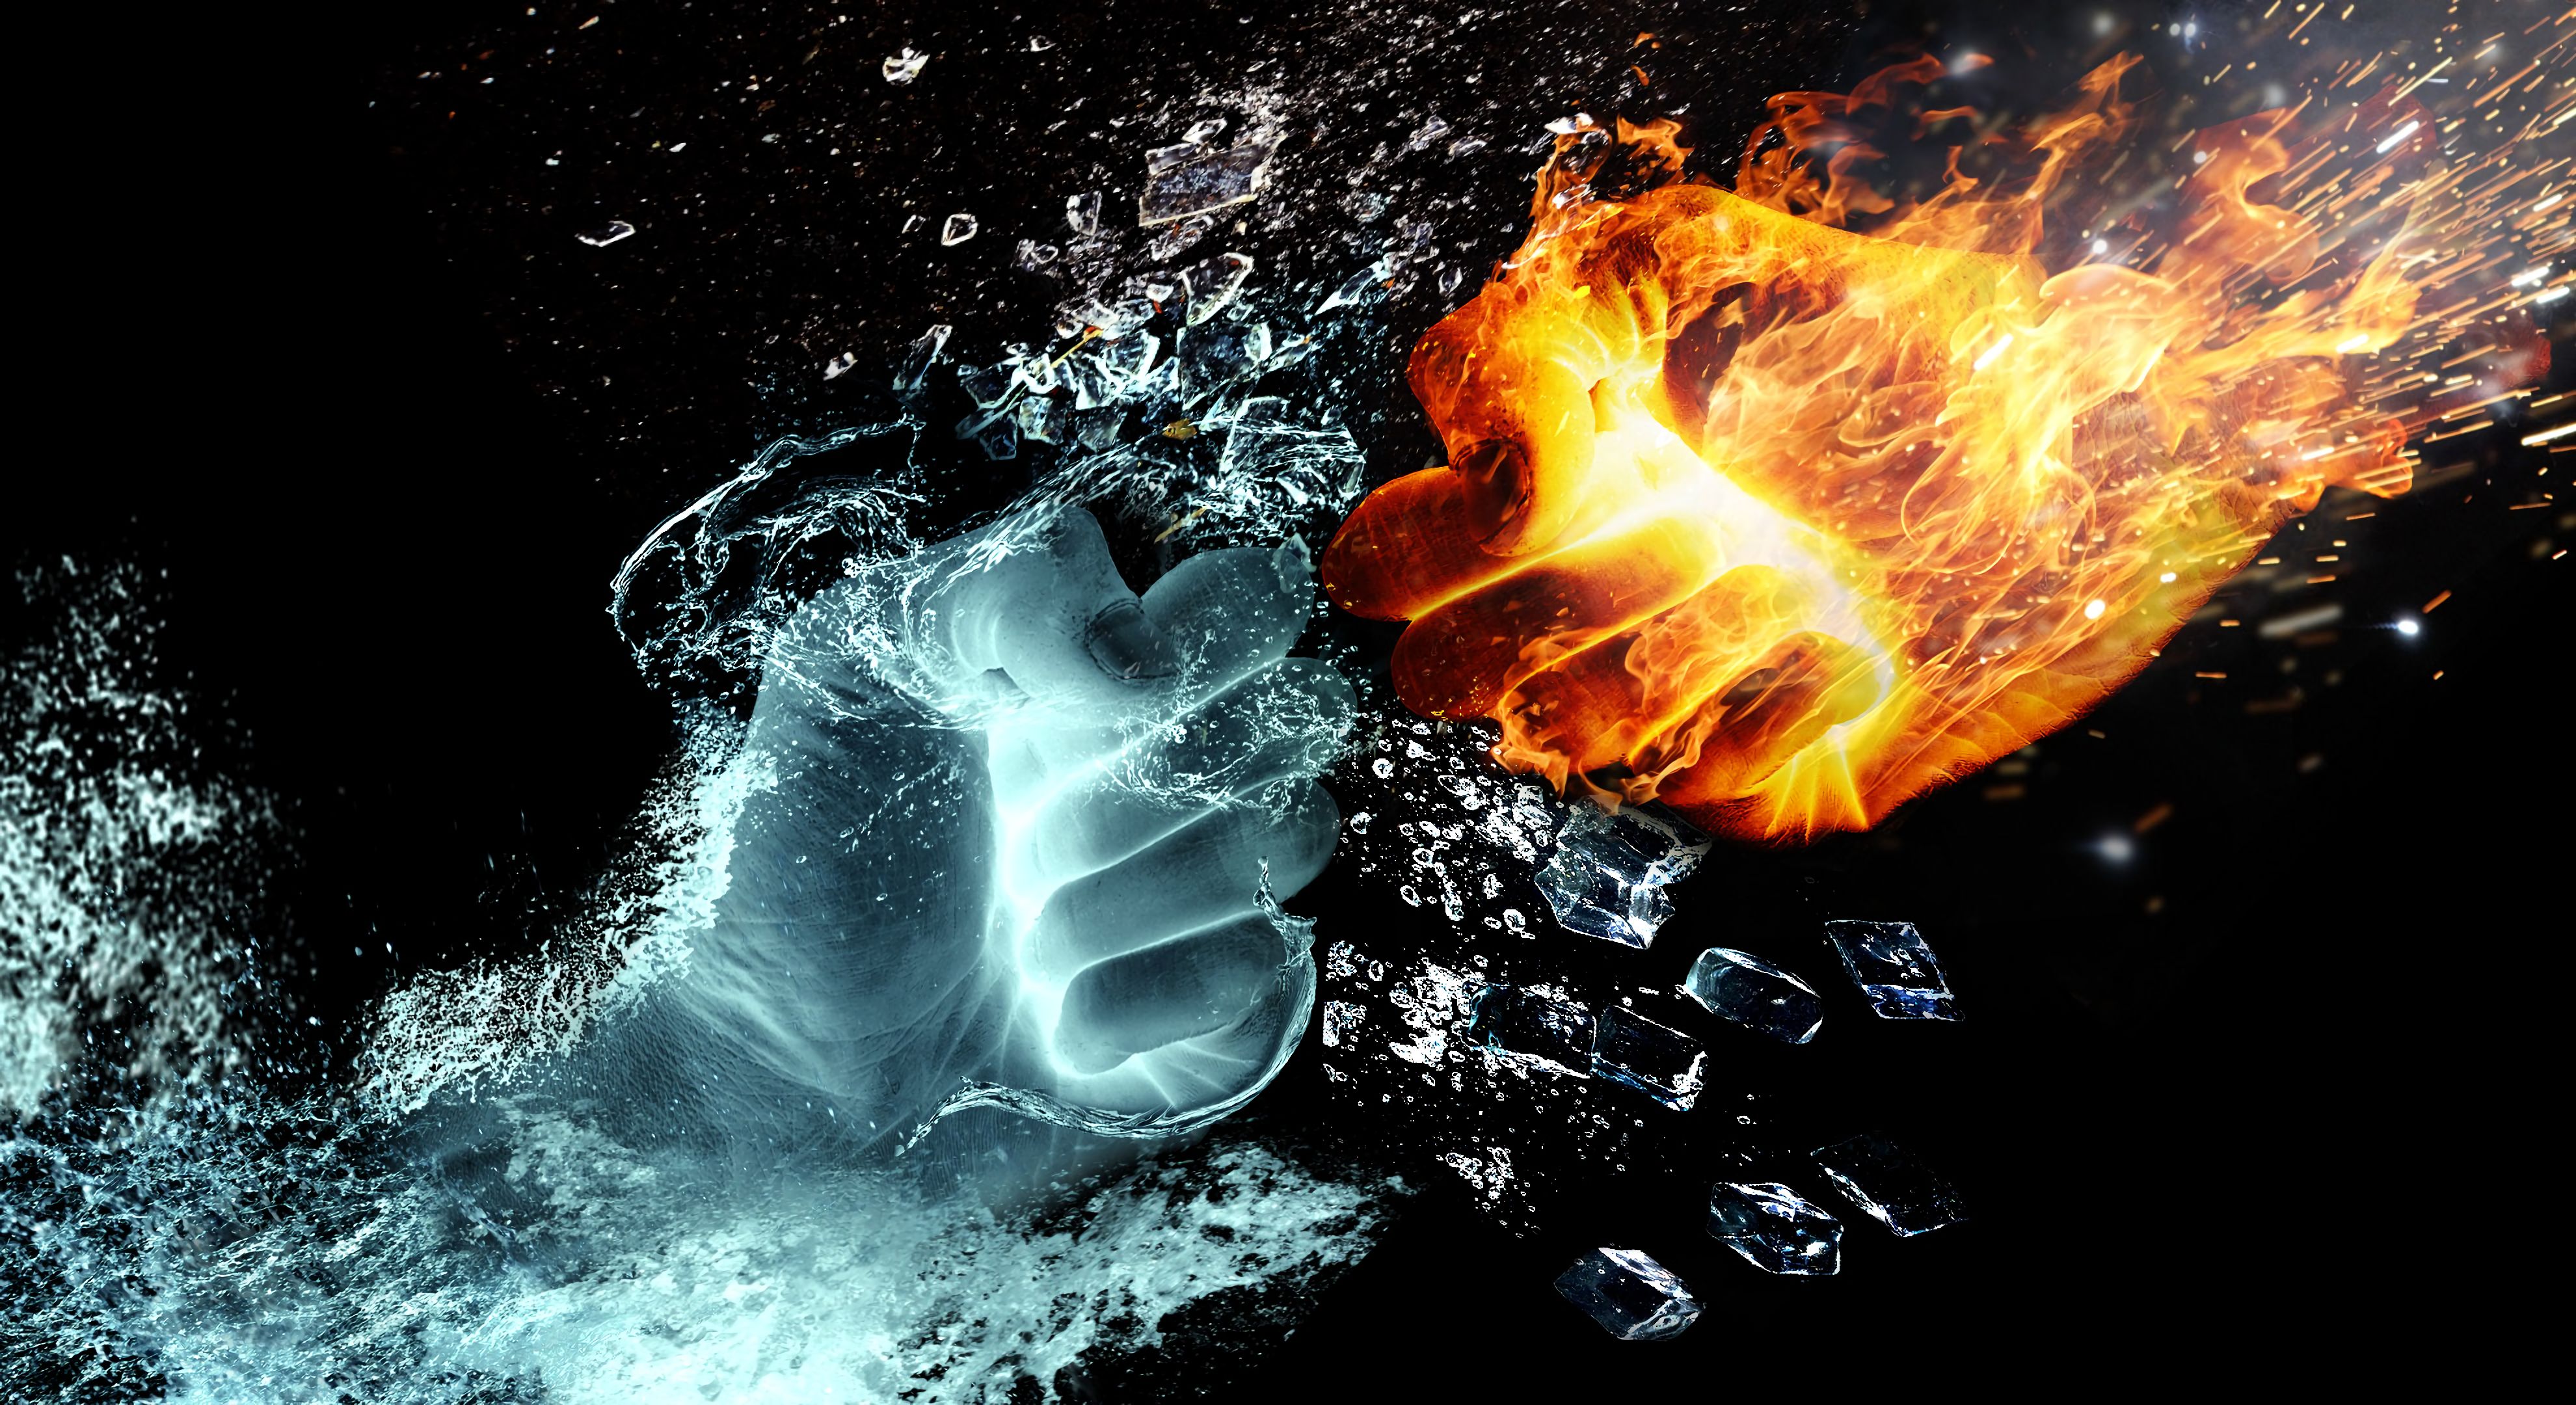 Mobile wallpaper hands, fire, water, miscellanea, miscellaneous, spray, shards, smithereens